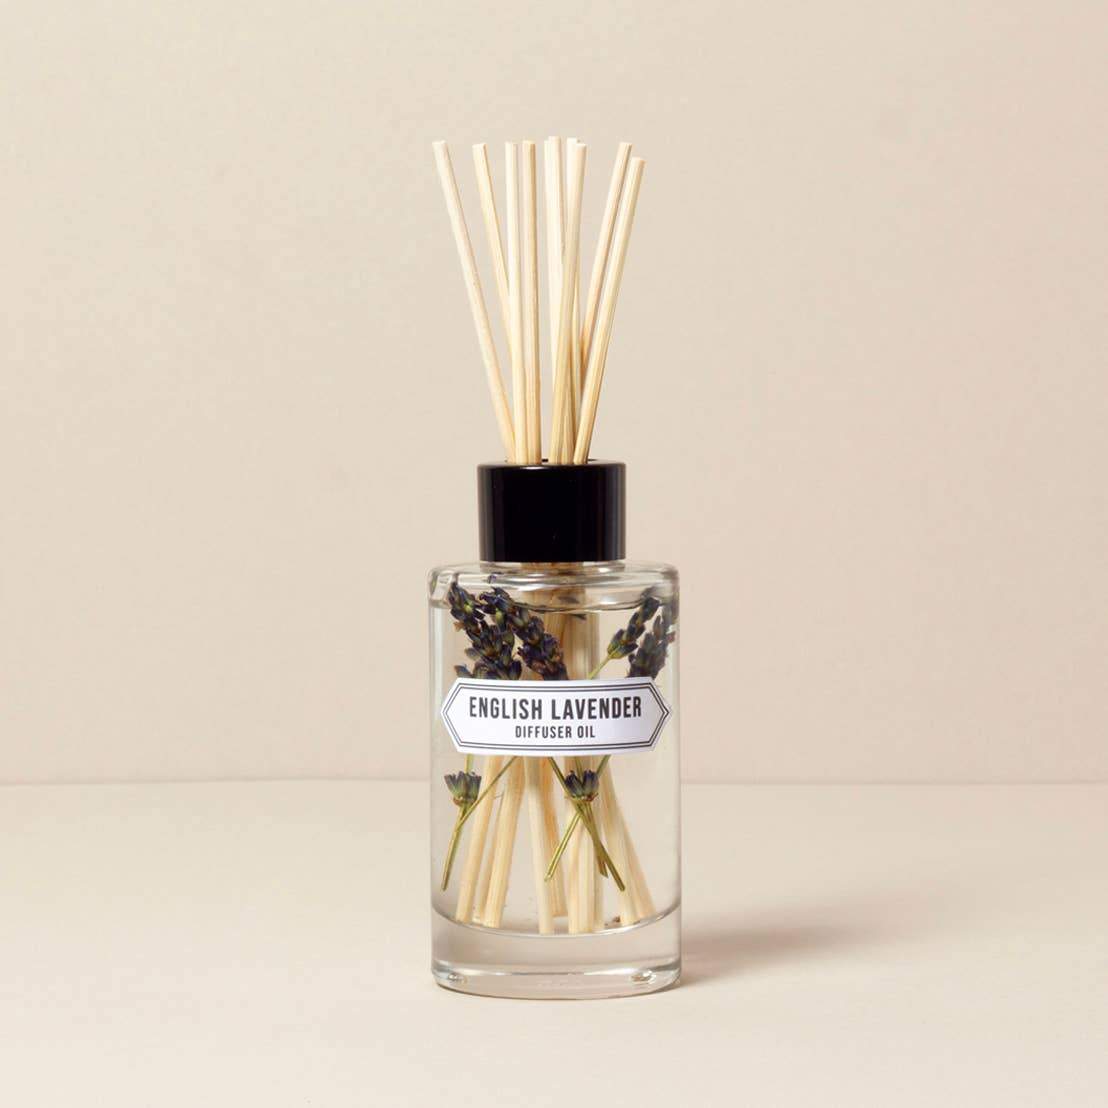 A clear glass diffuser bottle labeled "Norfolk Natural Living English Lavender Diffuser - 200ml" with dried lavender inside and several reed sticks, against a neutral background.